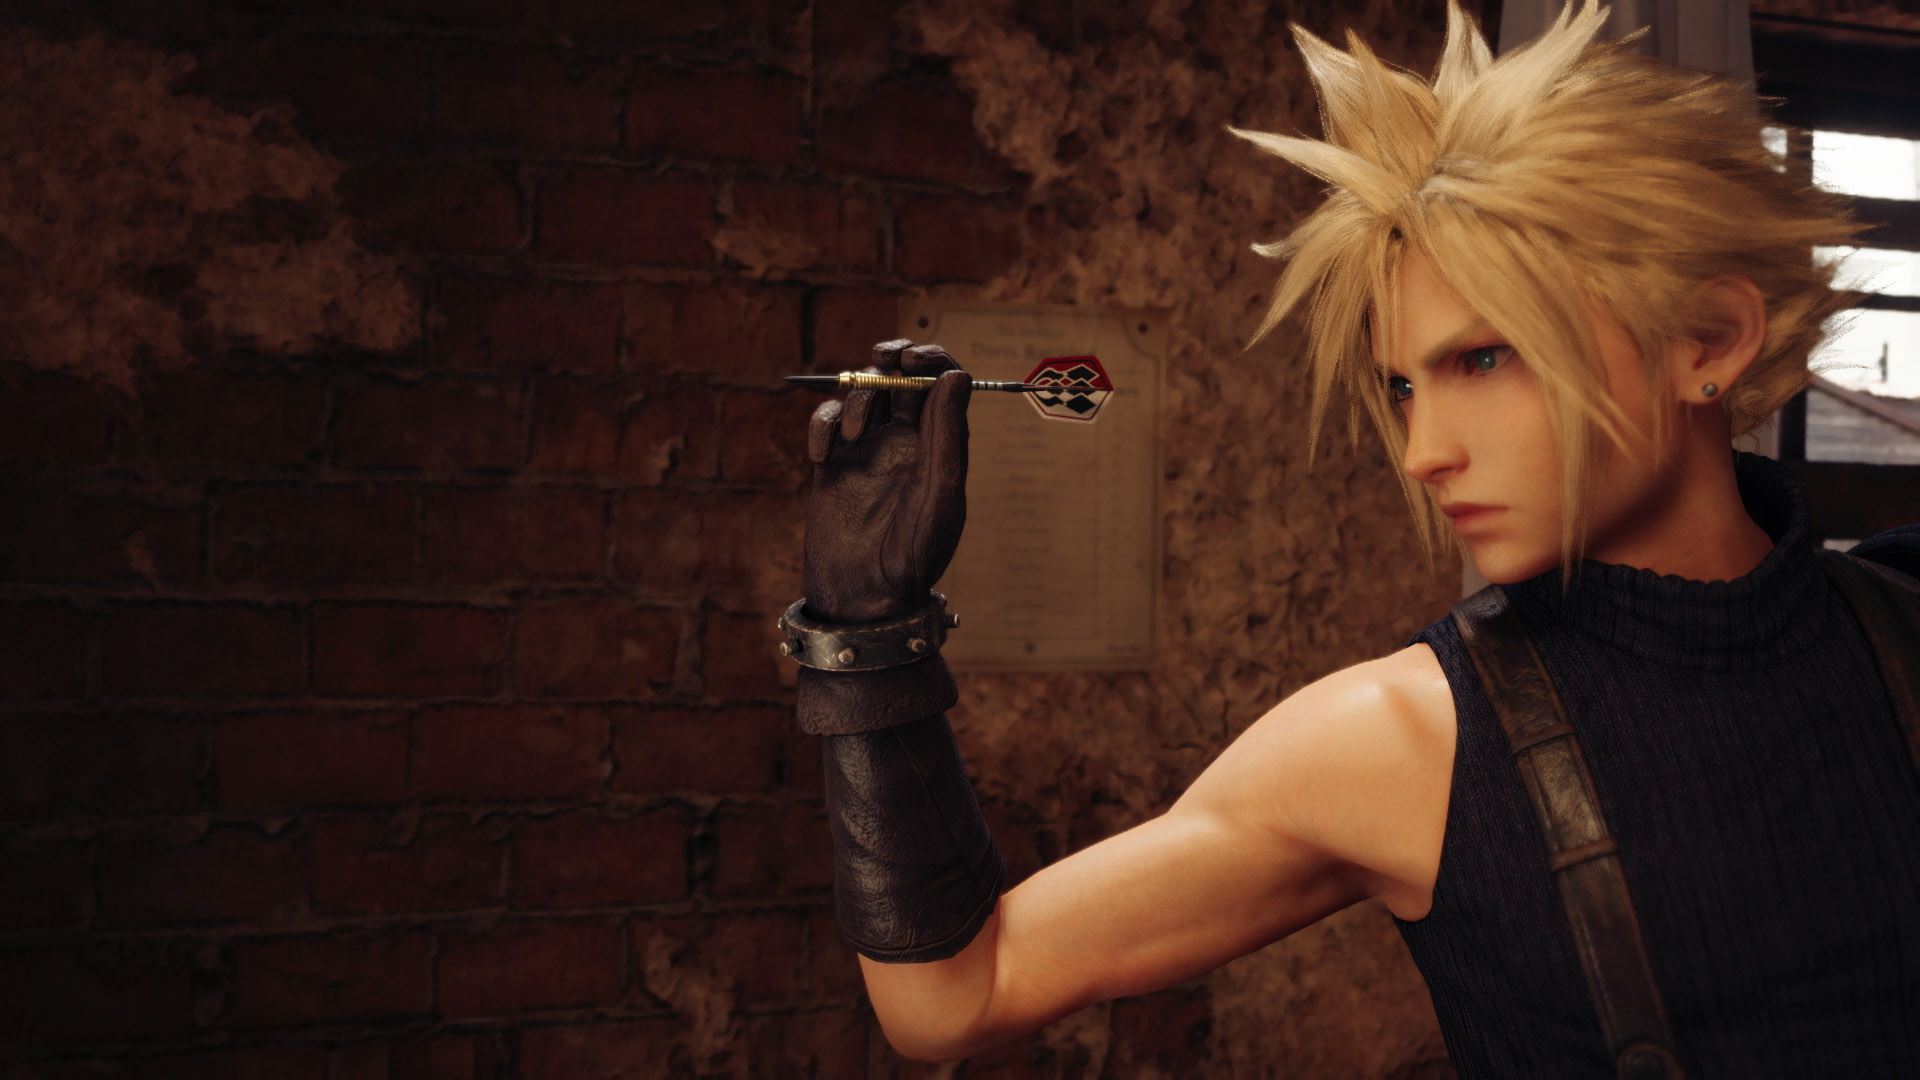 Free Final Fantasy Vii Remake Zoom Backgrounds Available To Download Square Enix Blog